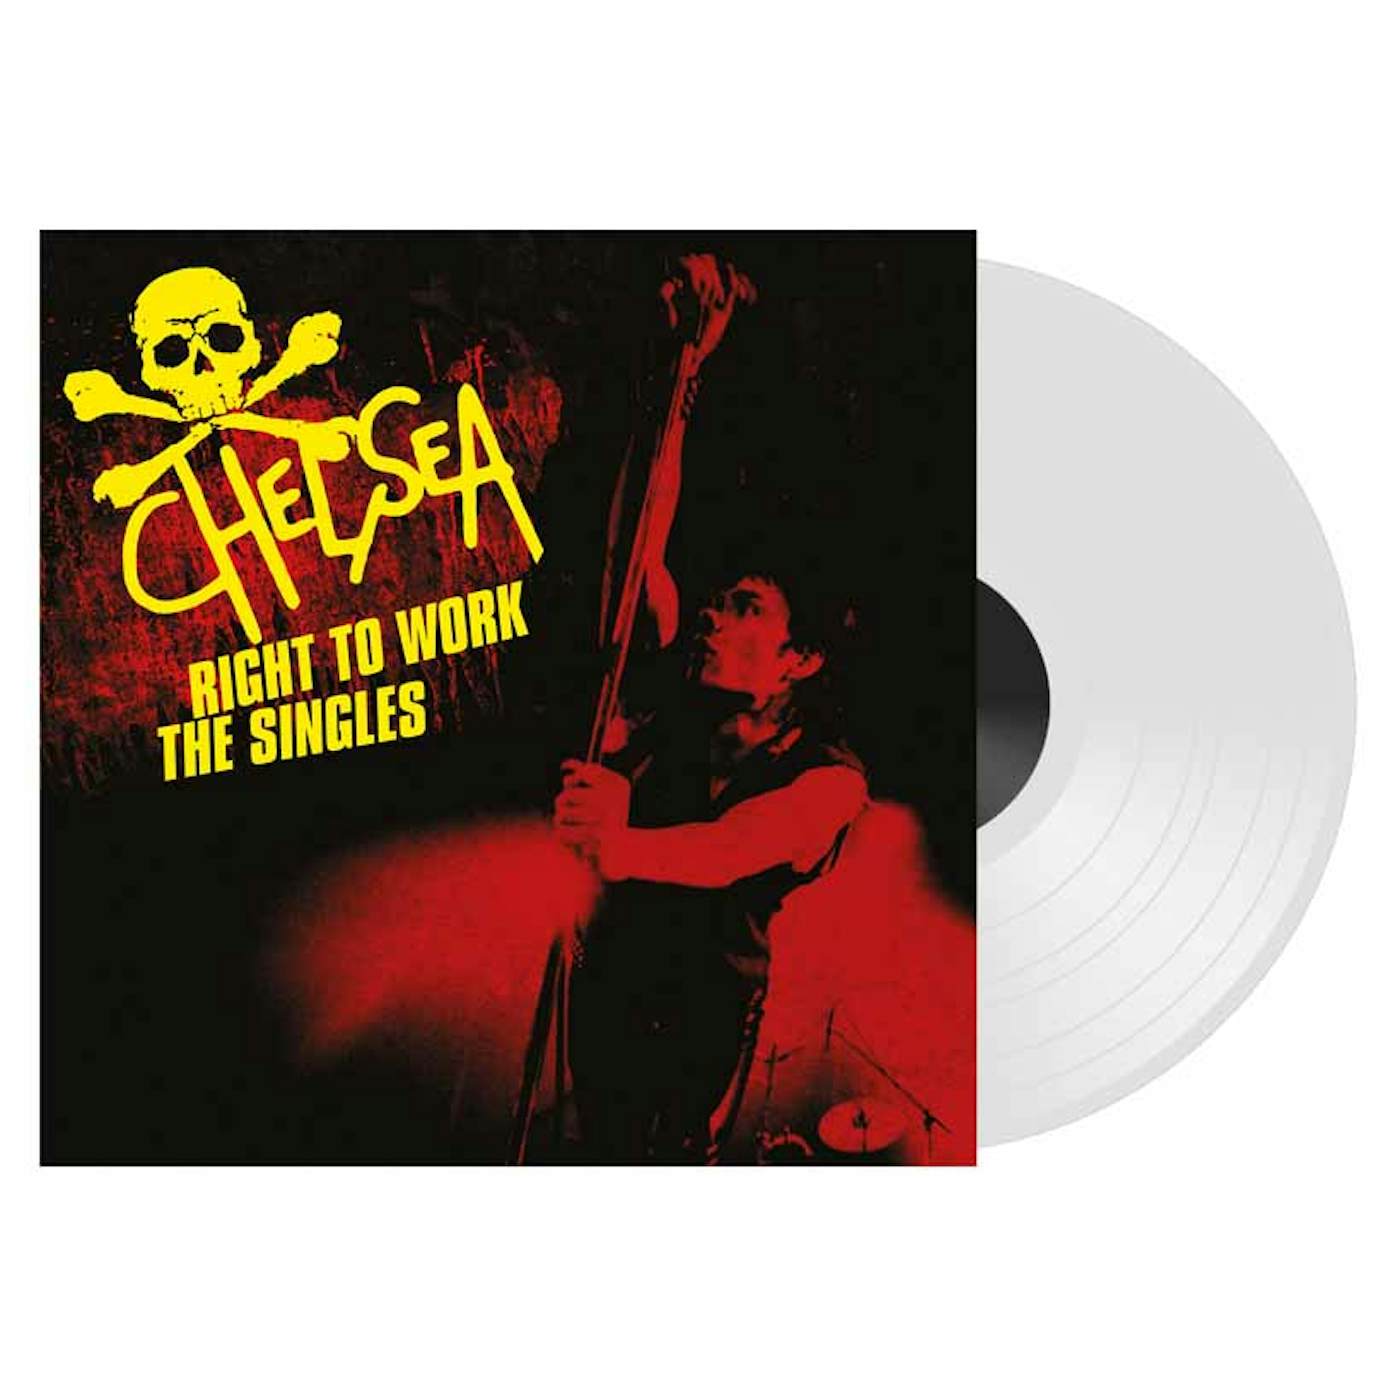 Chelsea RIGHT TO WORK-THE SINGLES Vinyl Record - Colored Vinyl, UK Release